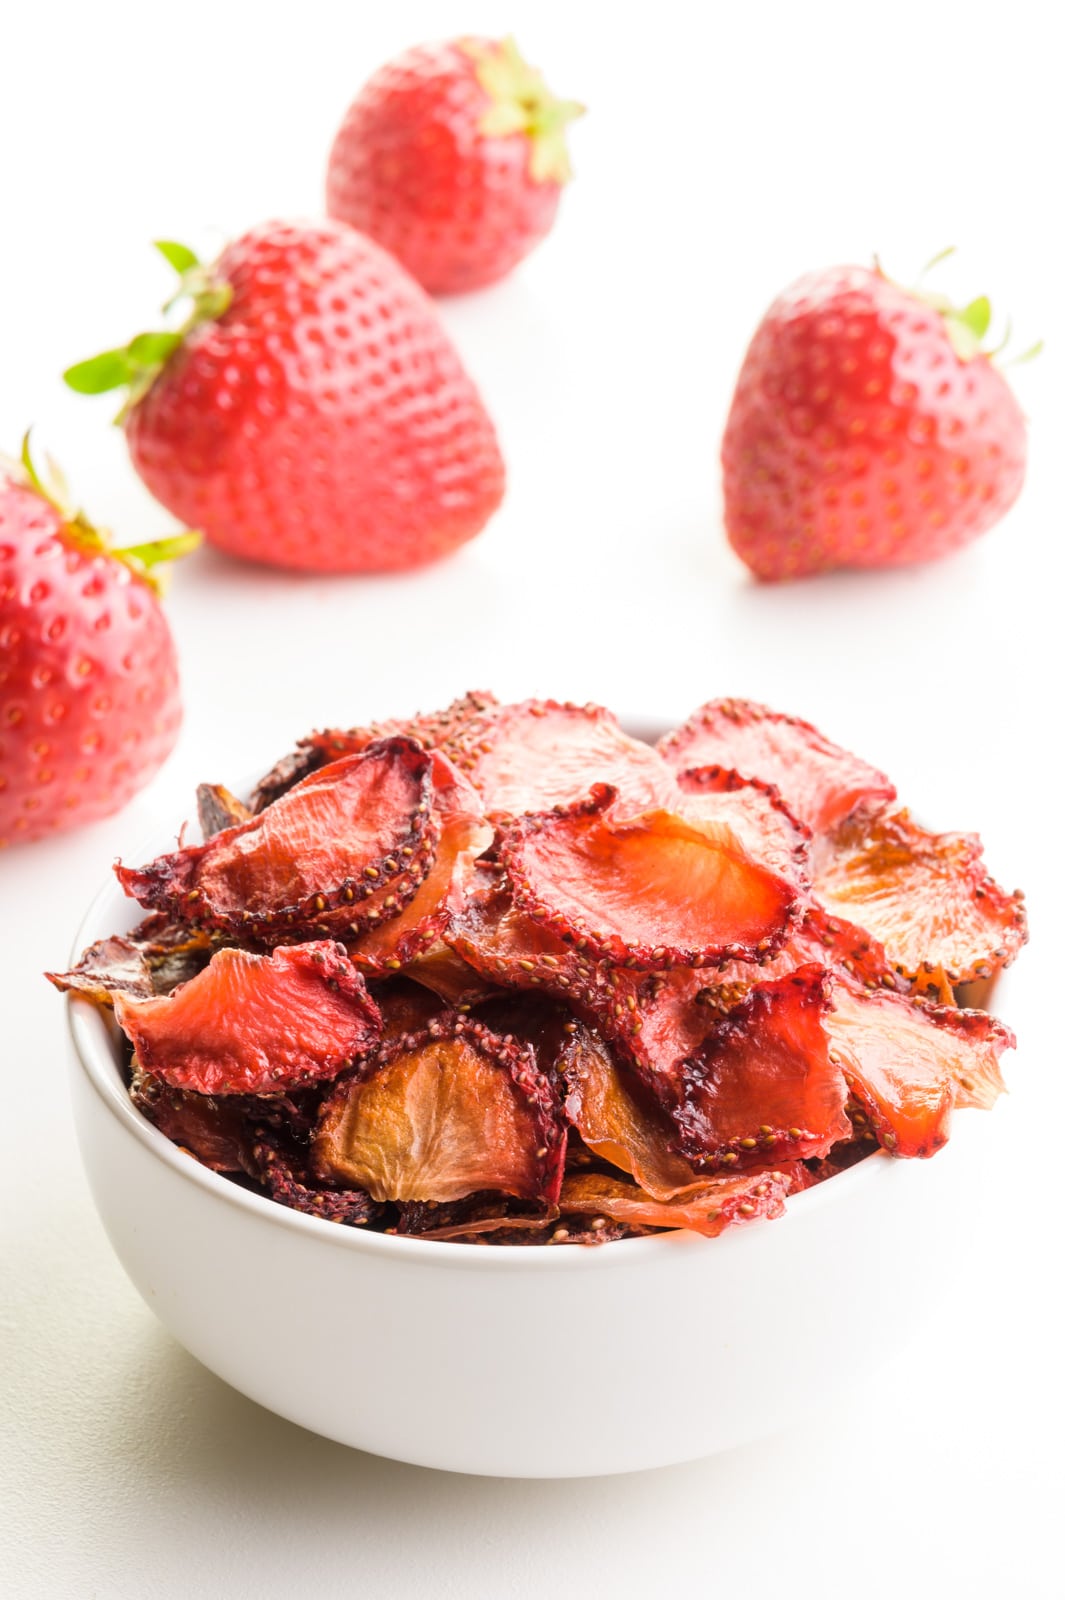 A bowl full of oven-dried strawberries sits in front of fresh strawberries.